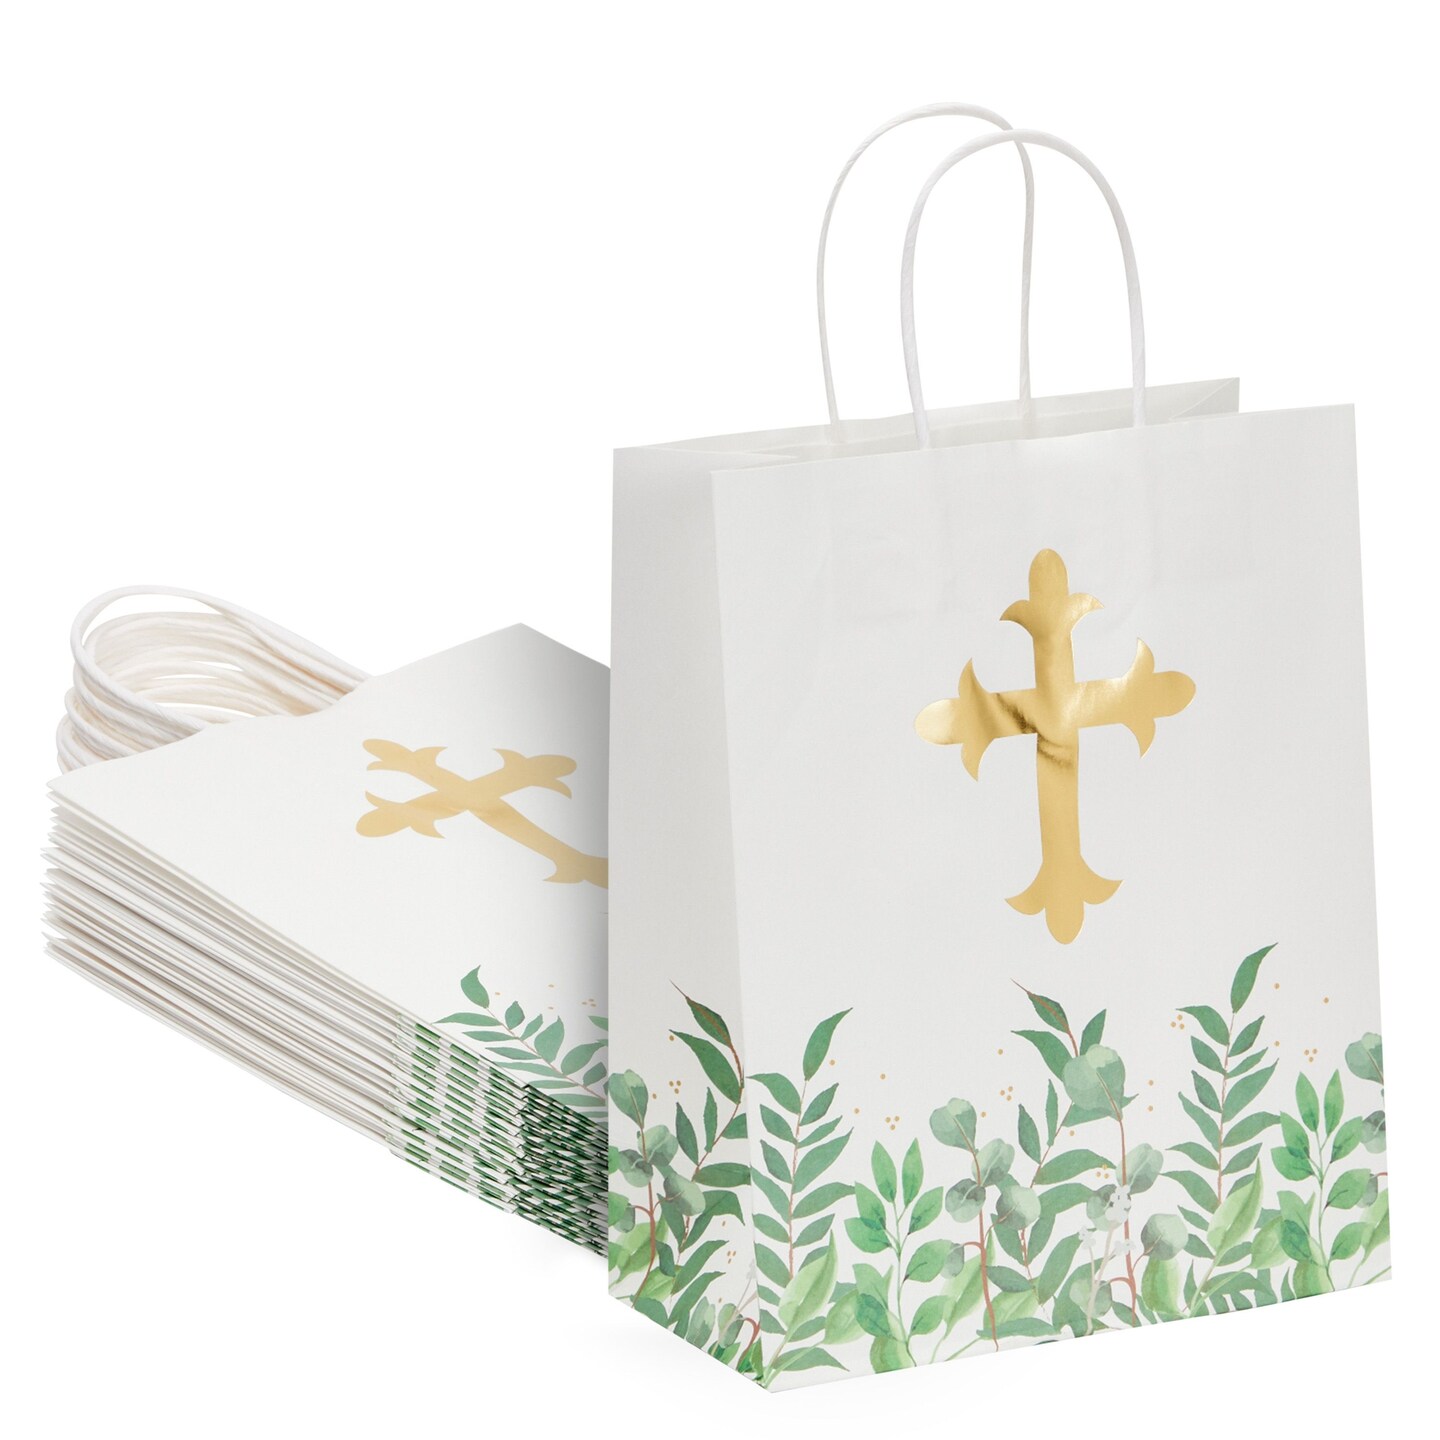 First Communion Gifts for Sale – Matthew F. Sheehan's